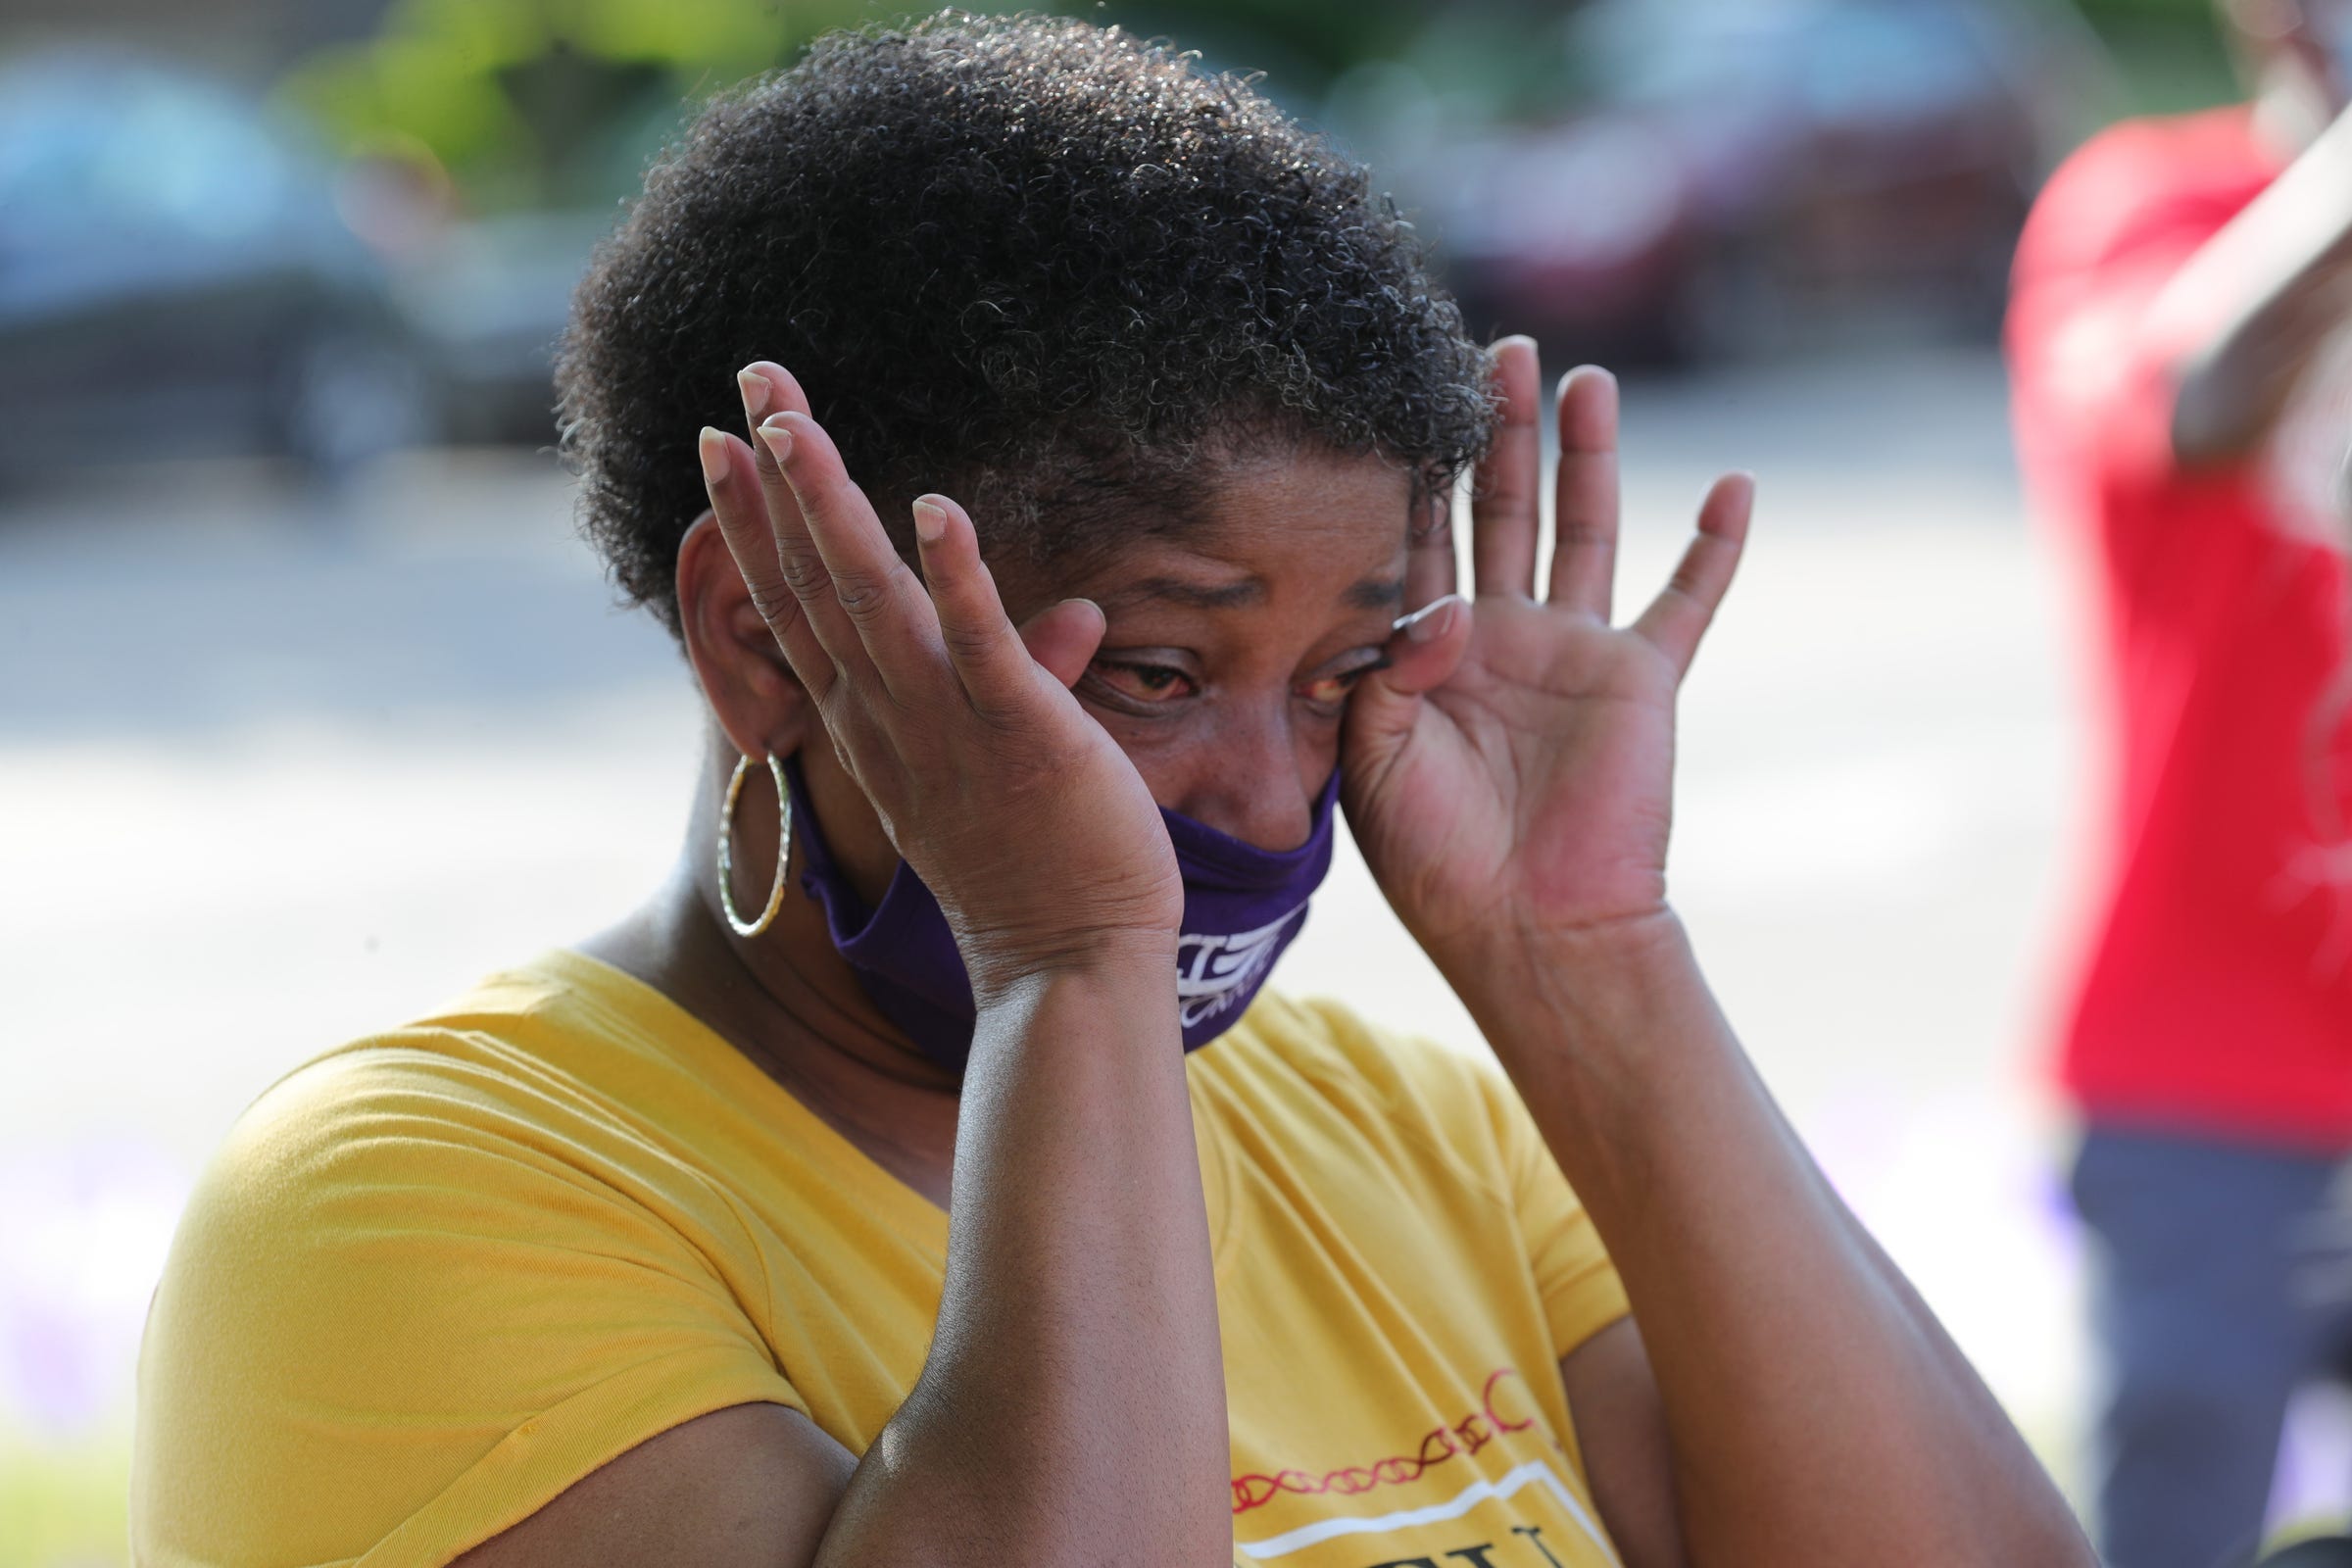 Terry Ells-berry wipes away tears during the program as Members of SEIU and community members gathered on East Grand Boulevard to pay respects nursing home residents staff members who died from the COVID-19 virus on June 19, 2020 in Detroit. 1,900 purple flags were placed at the site to represent those who passed from the virus on June 18, 2020. Kym Worthy the Wayne County prosecutor was in attendance listening to speakers.